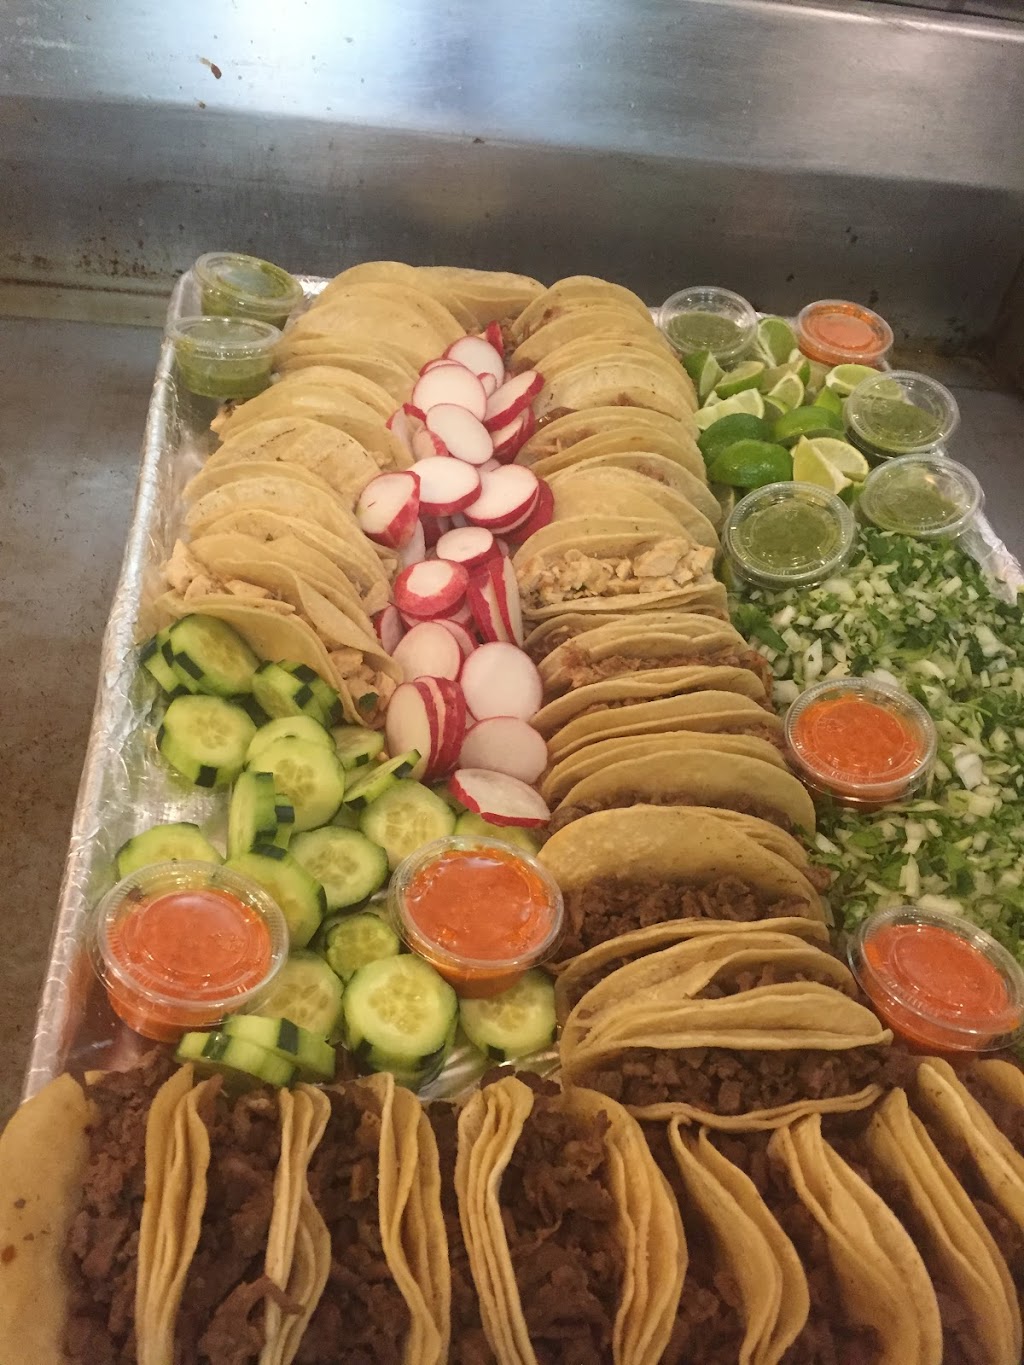 Taco Town catering & taquizas truck | 2237 Lehigh St, Allentown, PA 18103 | Phone: (484) 795-8488